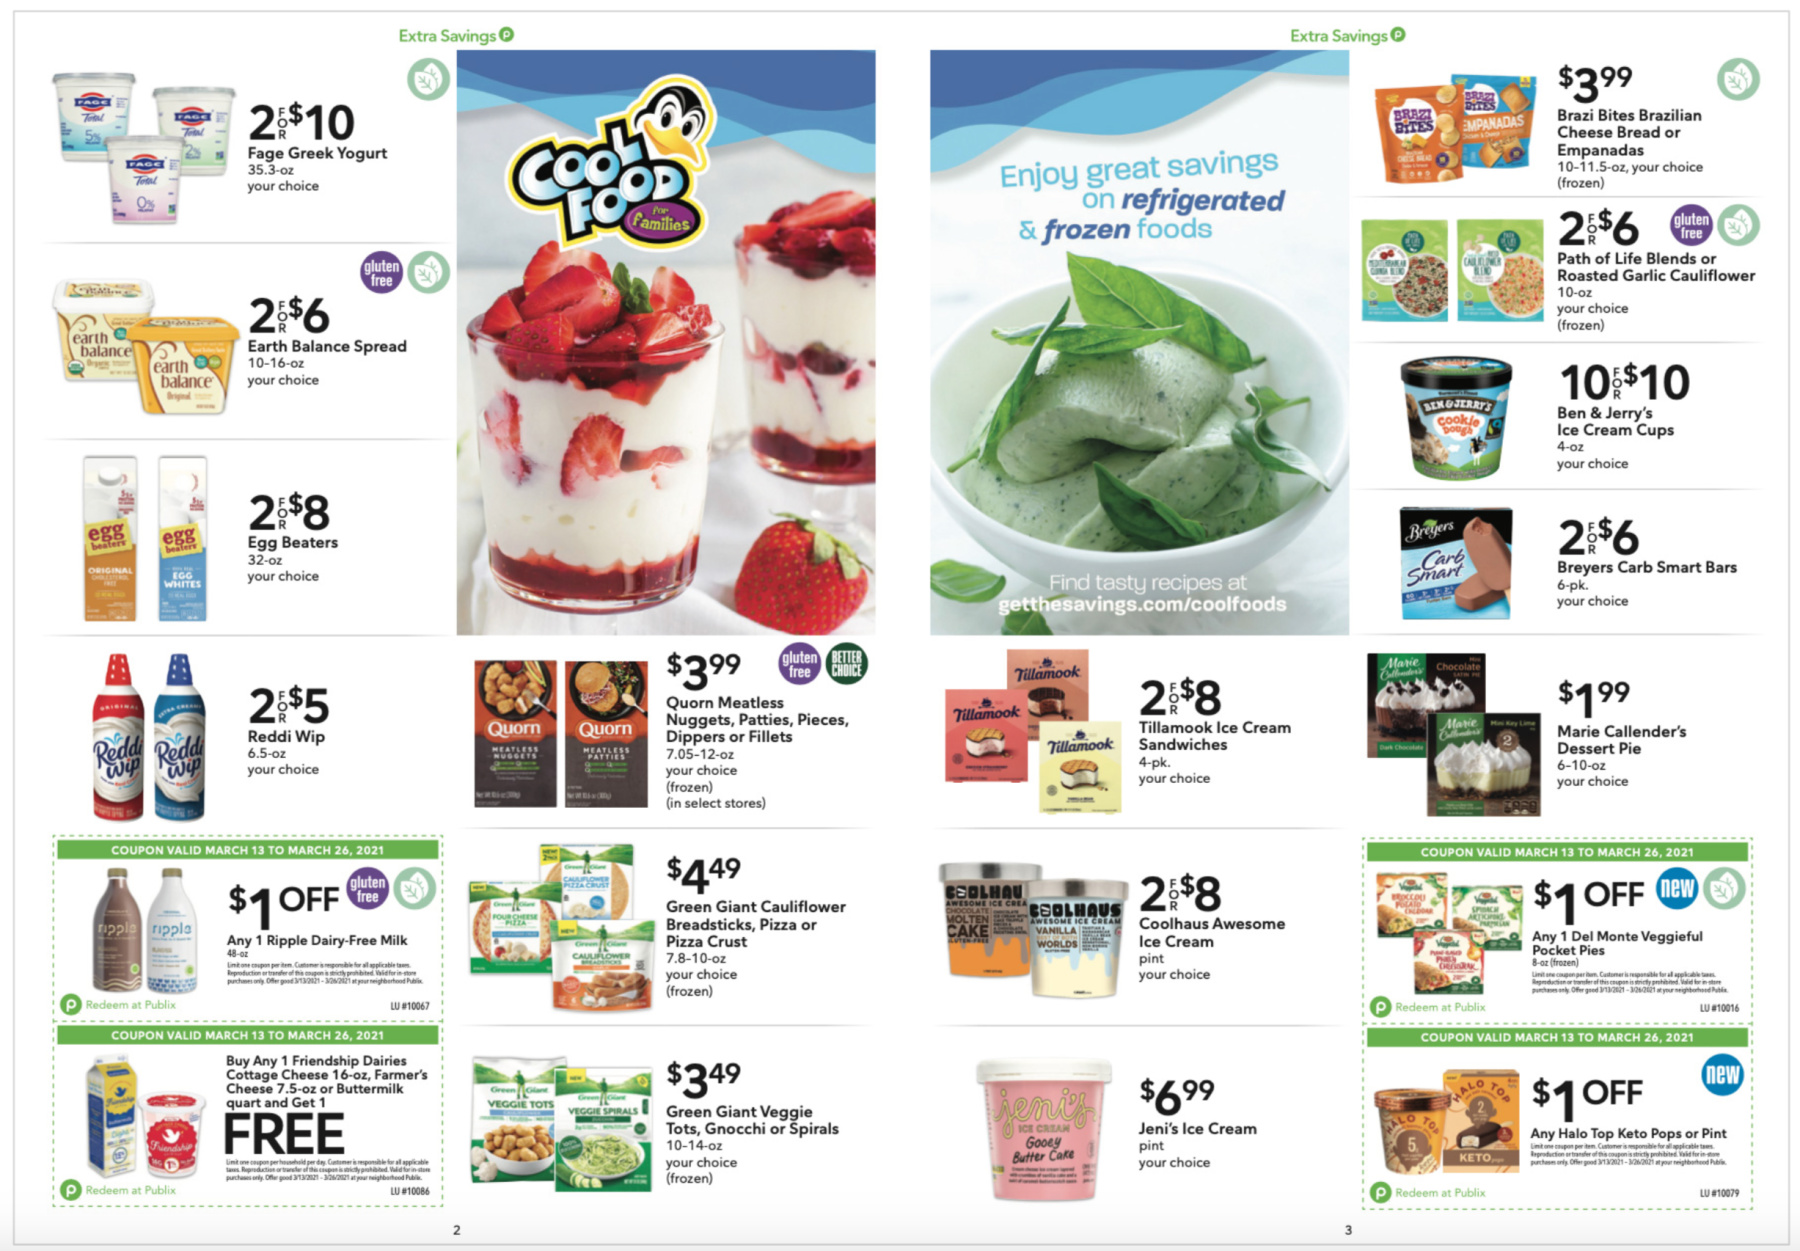 The Cool Foods For Families Promo Is Back - Great Deals On Delicious Refrigerated & Frozen Foods At Publix! on I Heart Publix